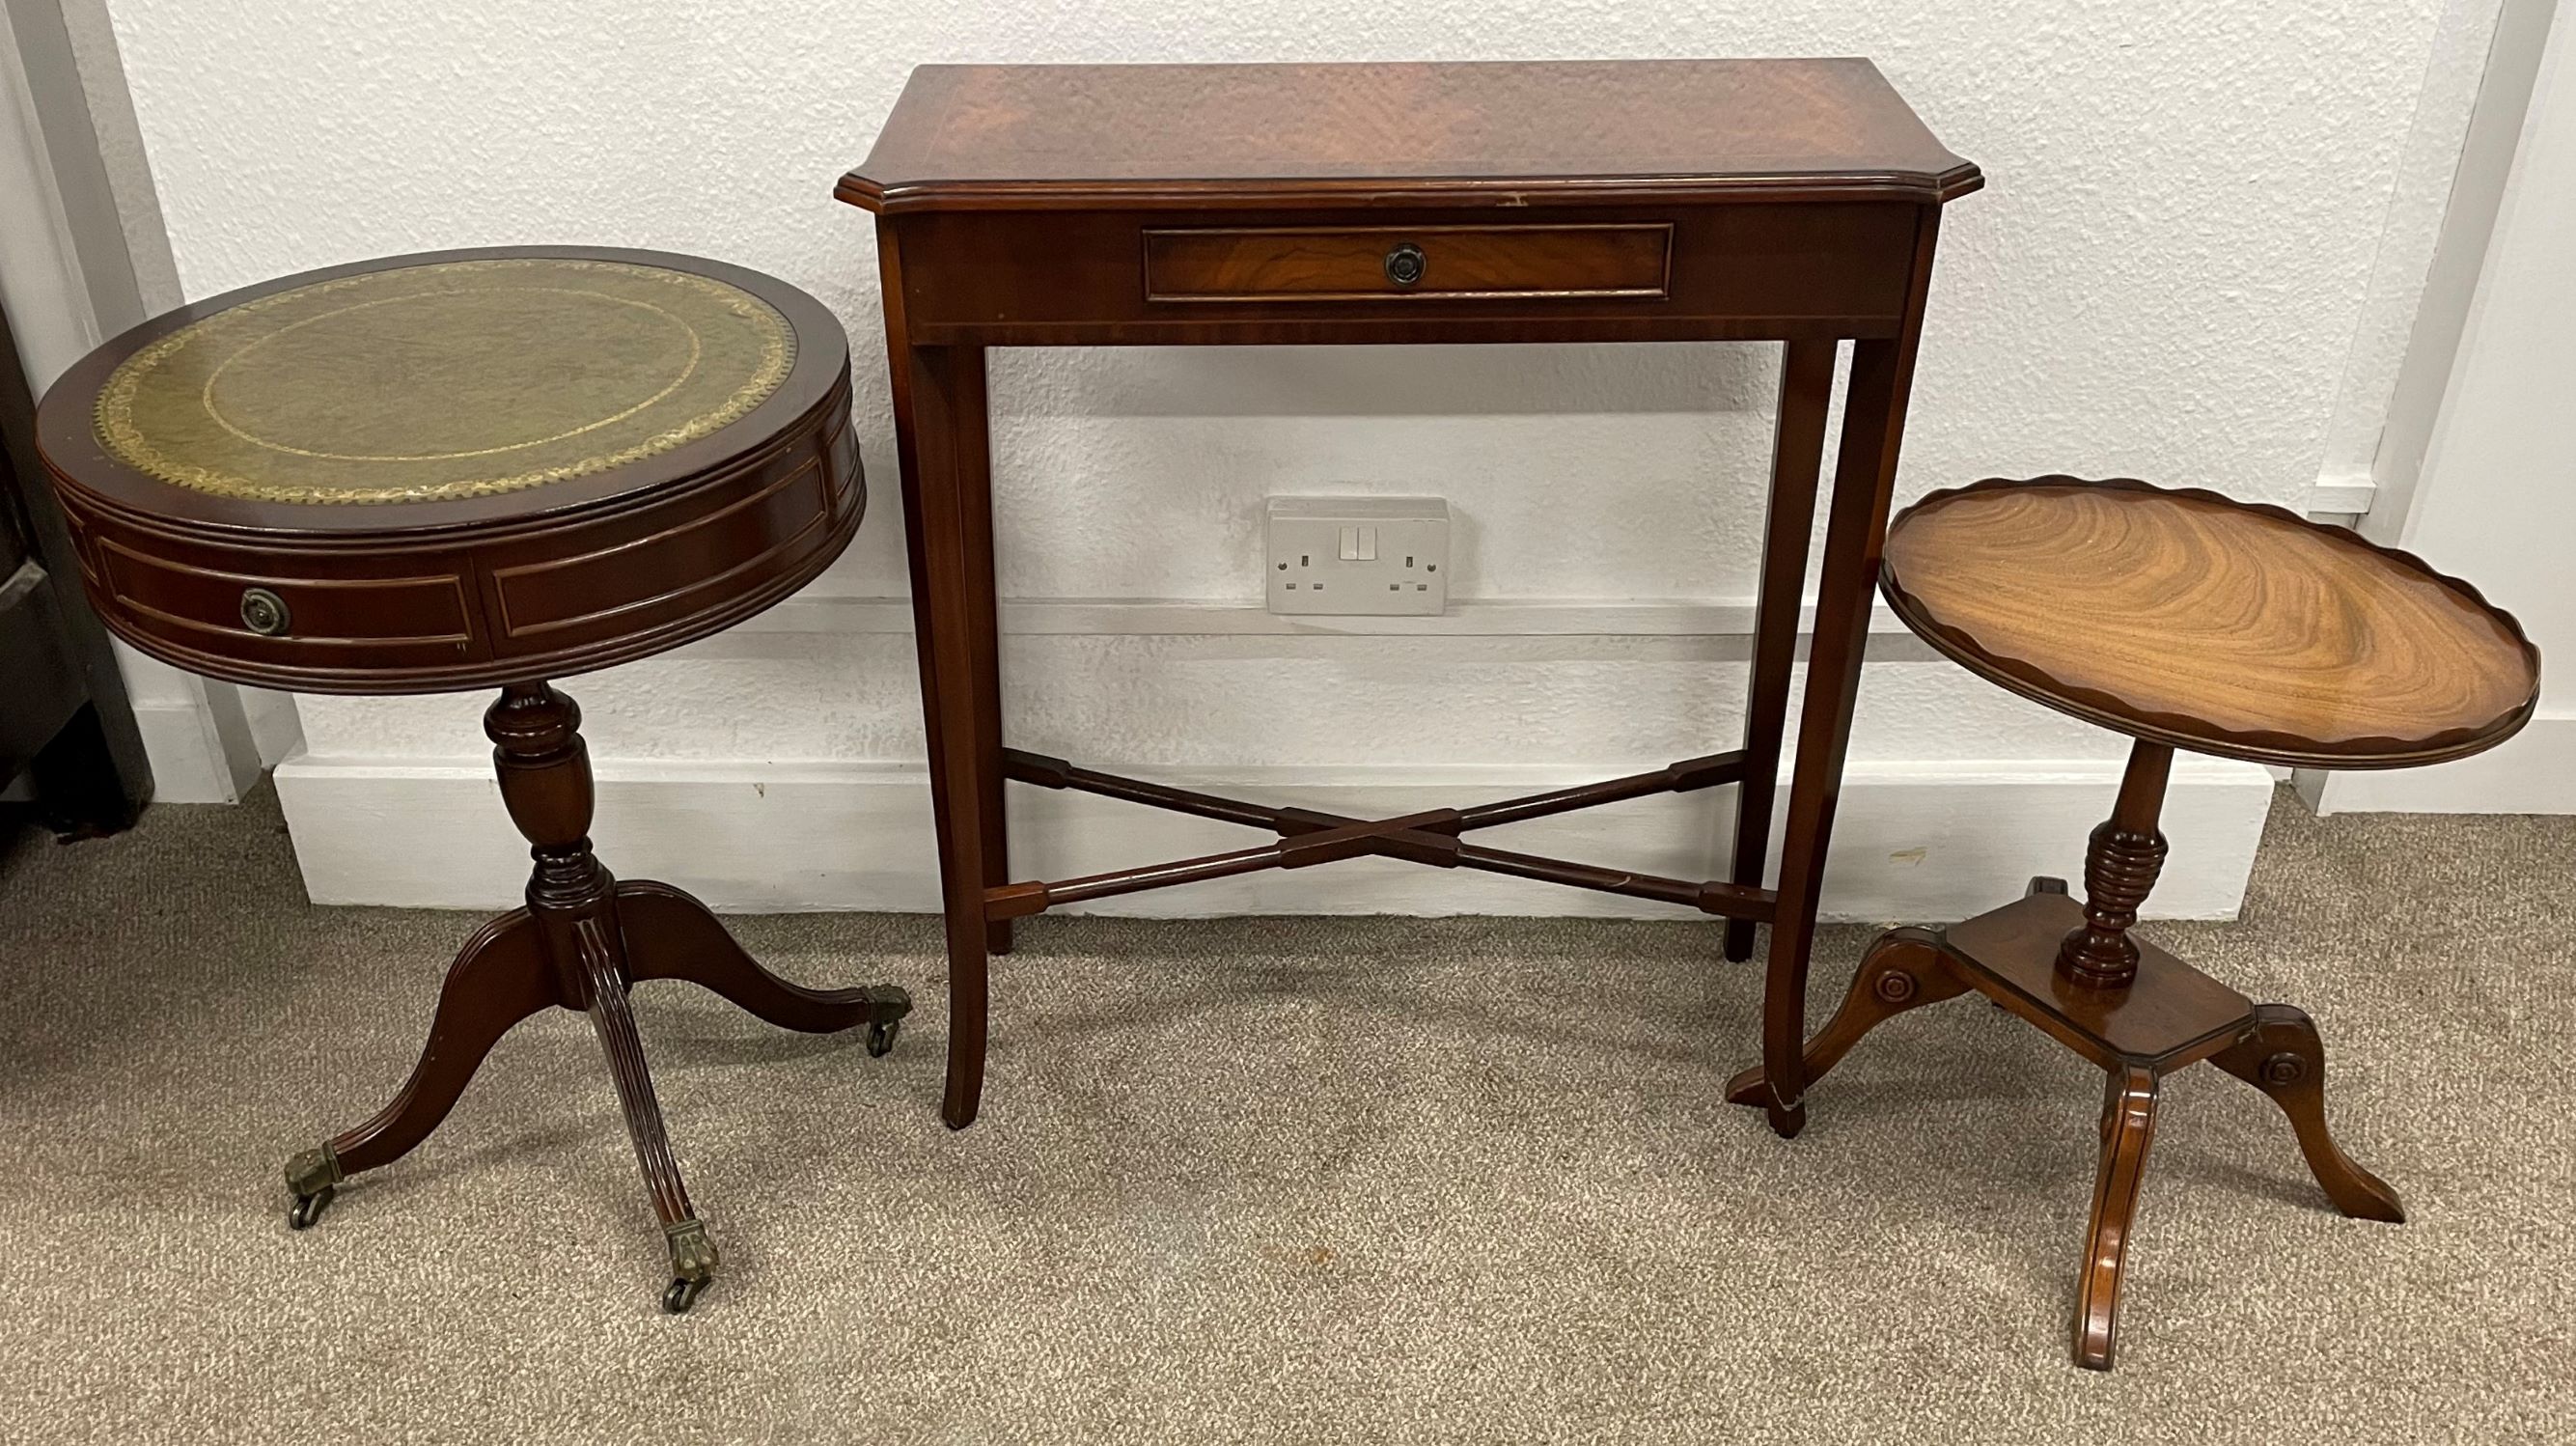 Regency style drum table, Regency style wine table and a side table